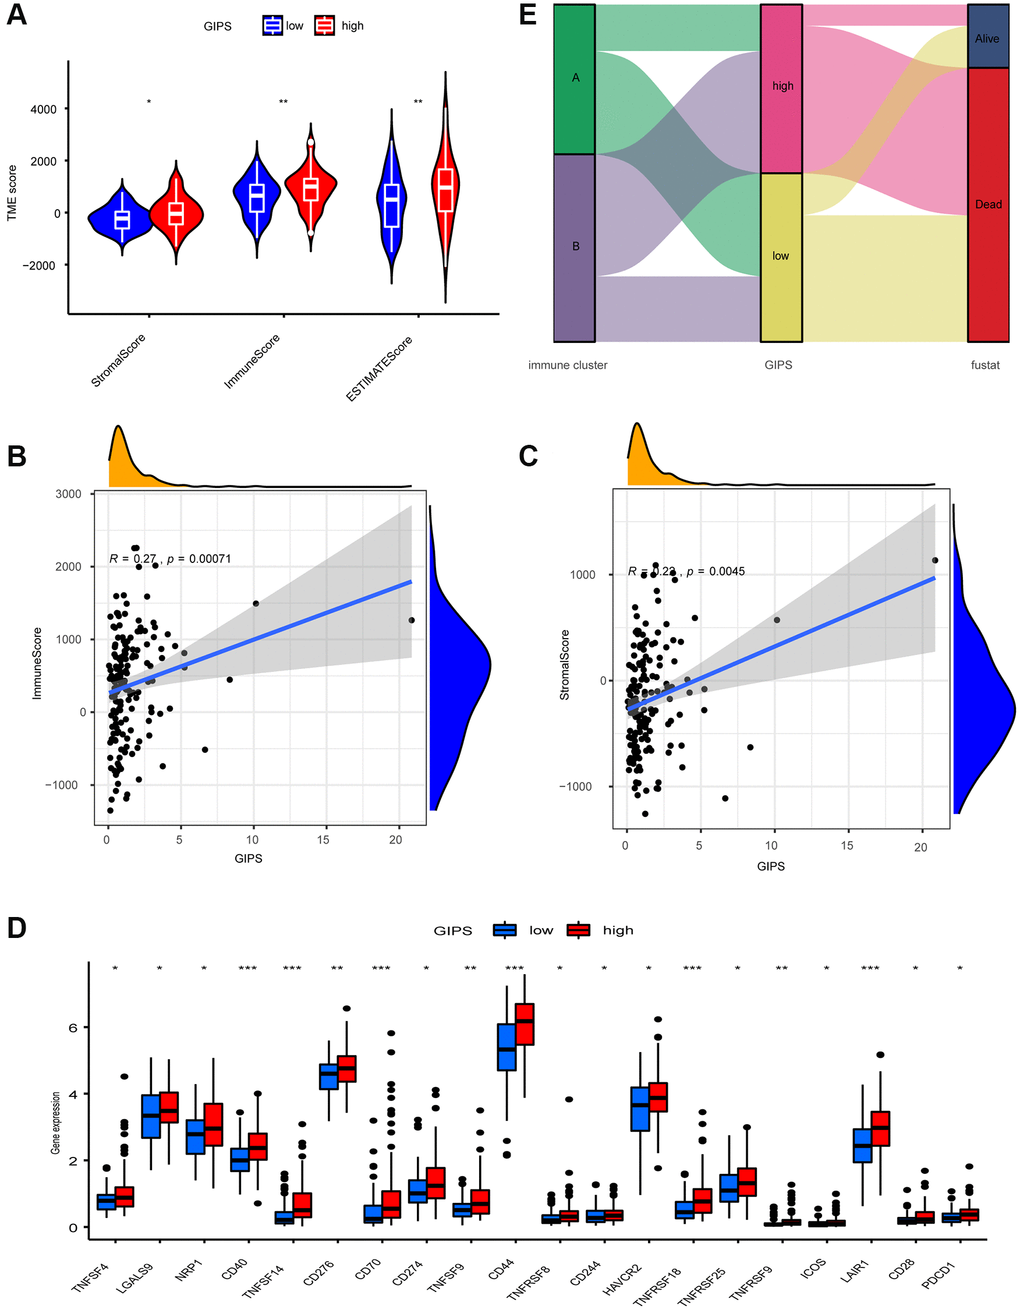 TME Characterization of distinct GIPS subgroups. (A) TME scores of the distinct GIPS subgroups. (B) Spearman correlation analysis of GIPS scores with immune scores. R = 0.27, P ≤ 0.001. (C) Spearman correlation analysis of GIPS scores with stromal scores. R = 0.22, P ≤ 0.01. (D) Differential analysis of expression of immune checkpoints in the different GIPS subgroups. (E) Alluvial diagram of GBM patient immune cluster and GIPS.